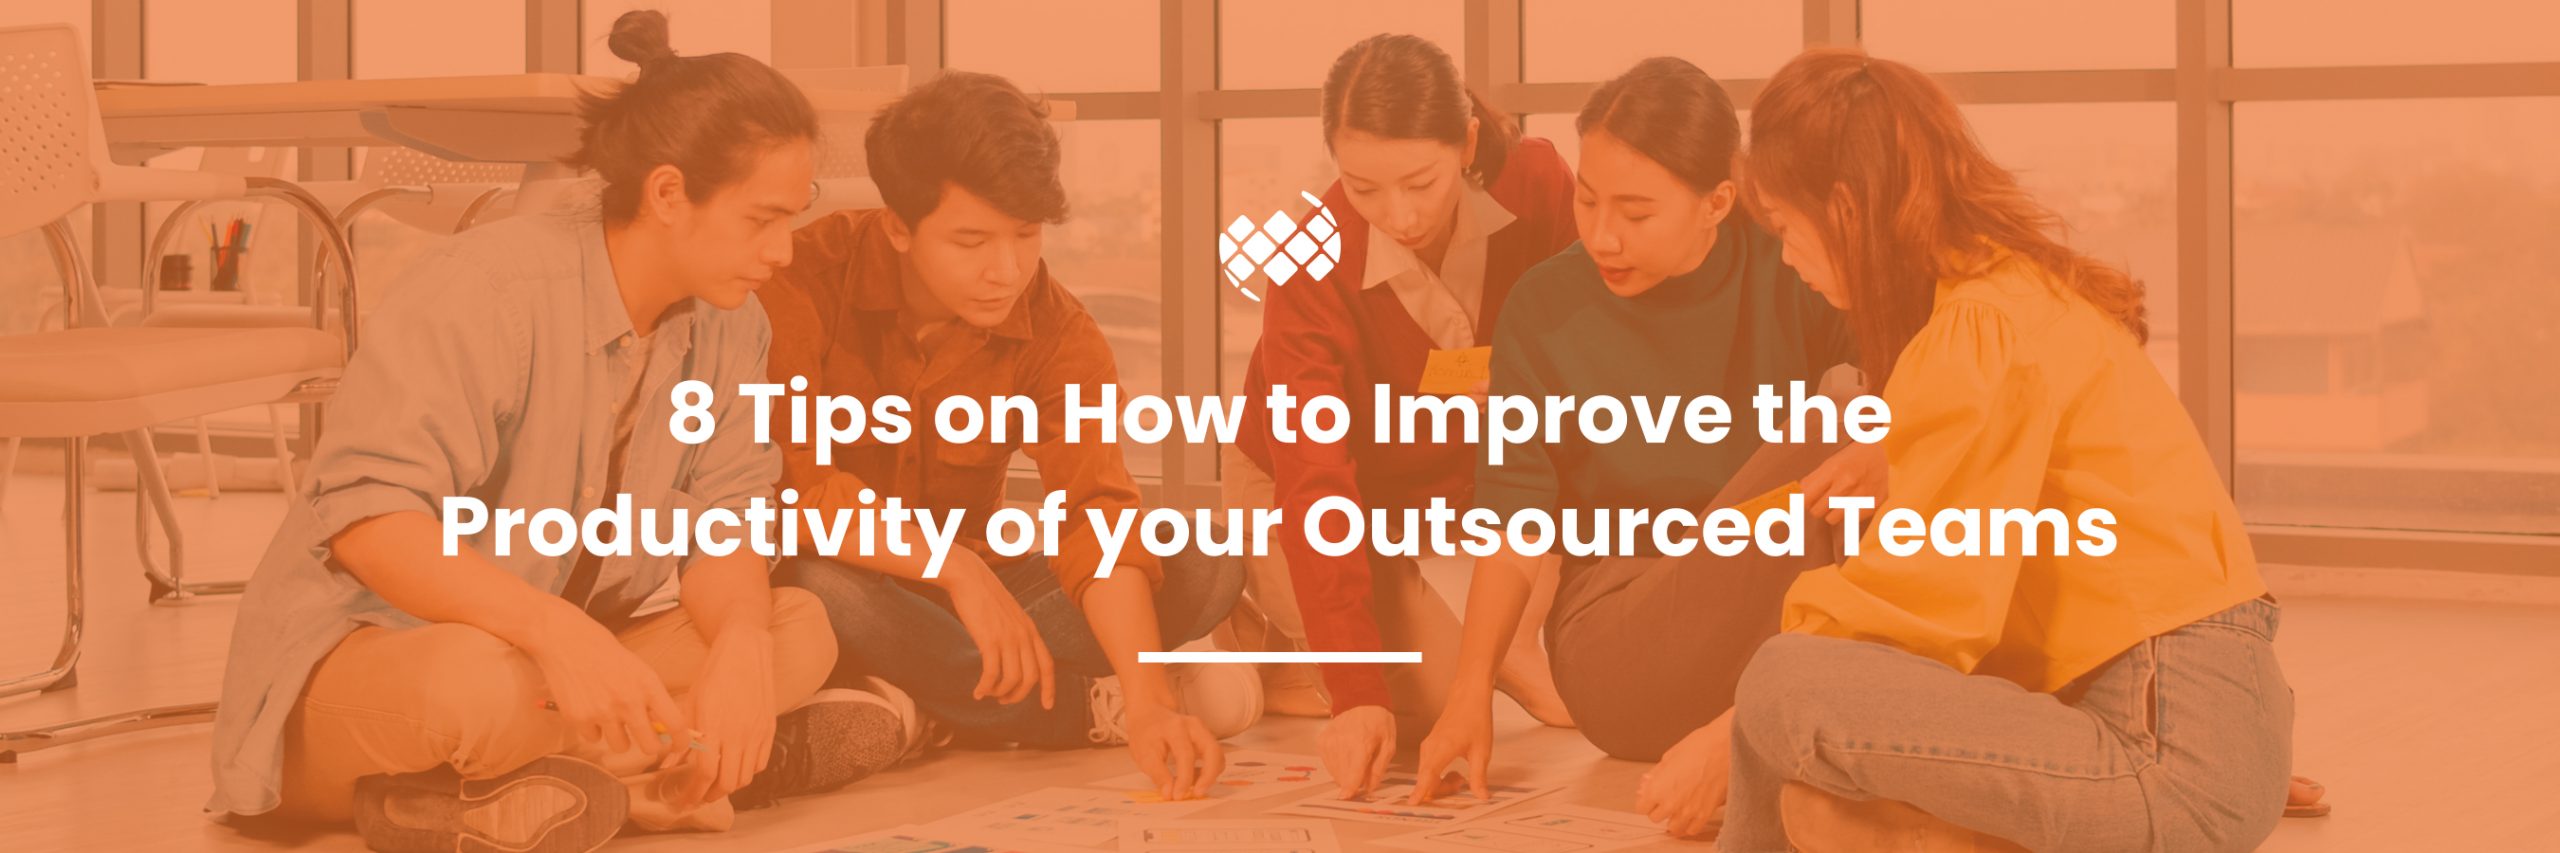 Tips on how to improve the productivity of your outsourced teams